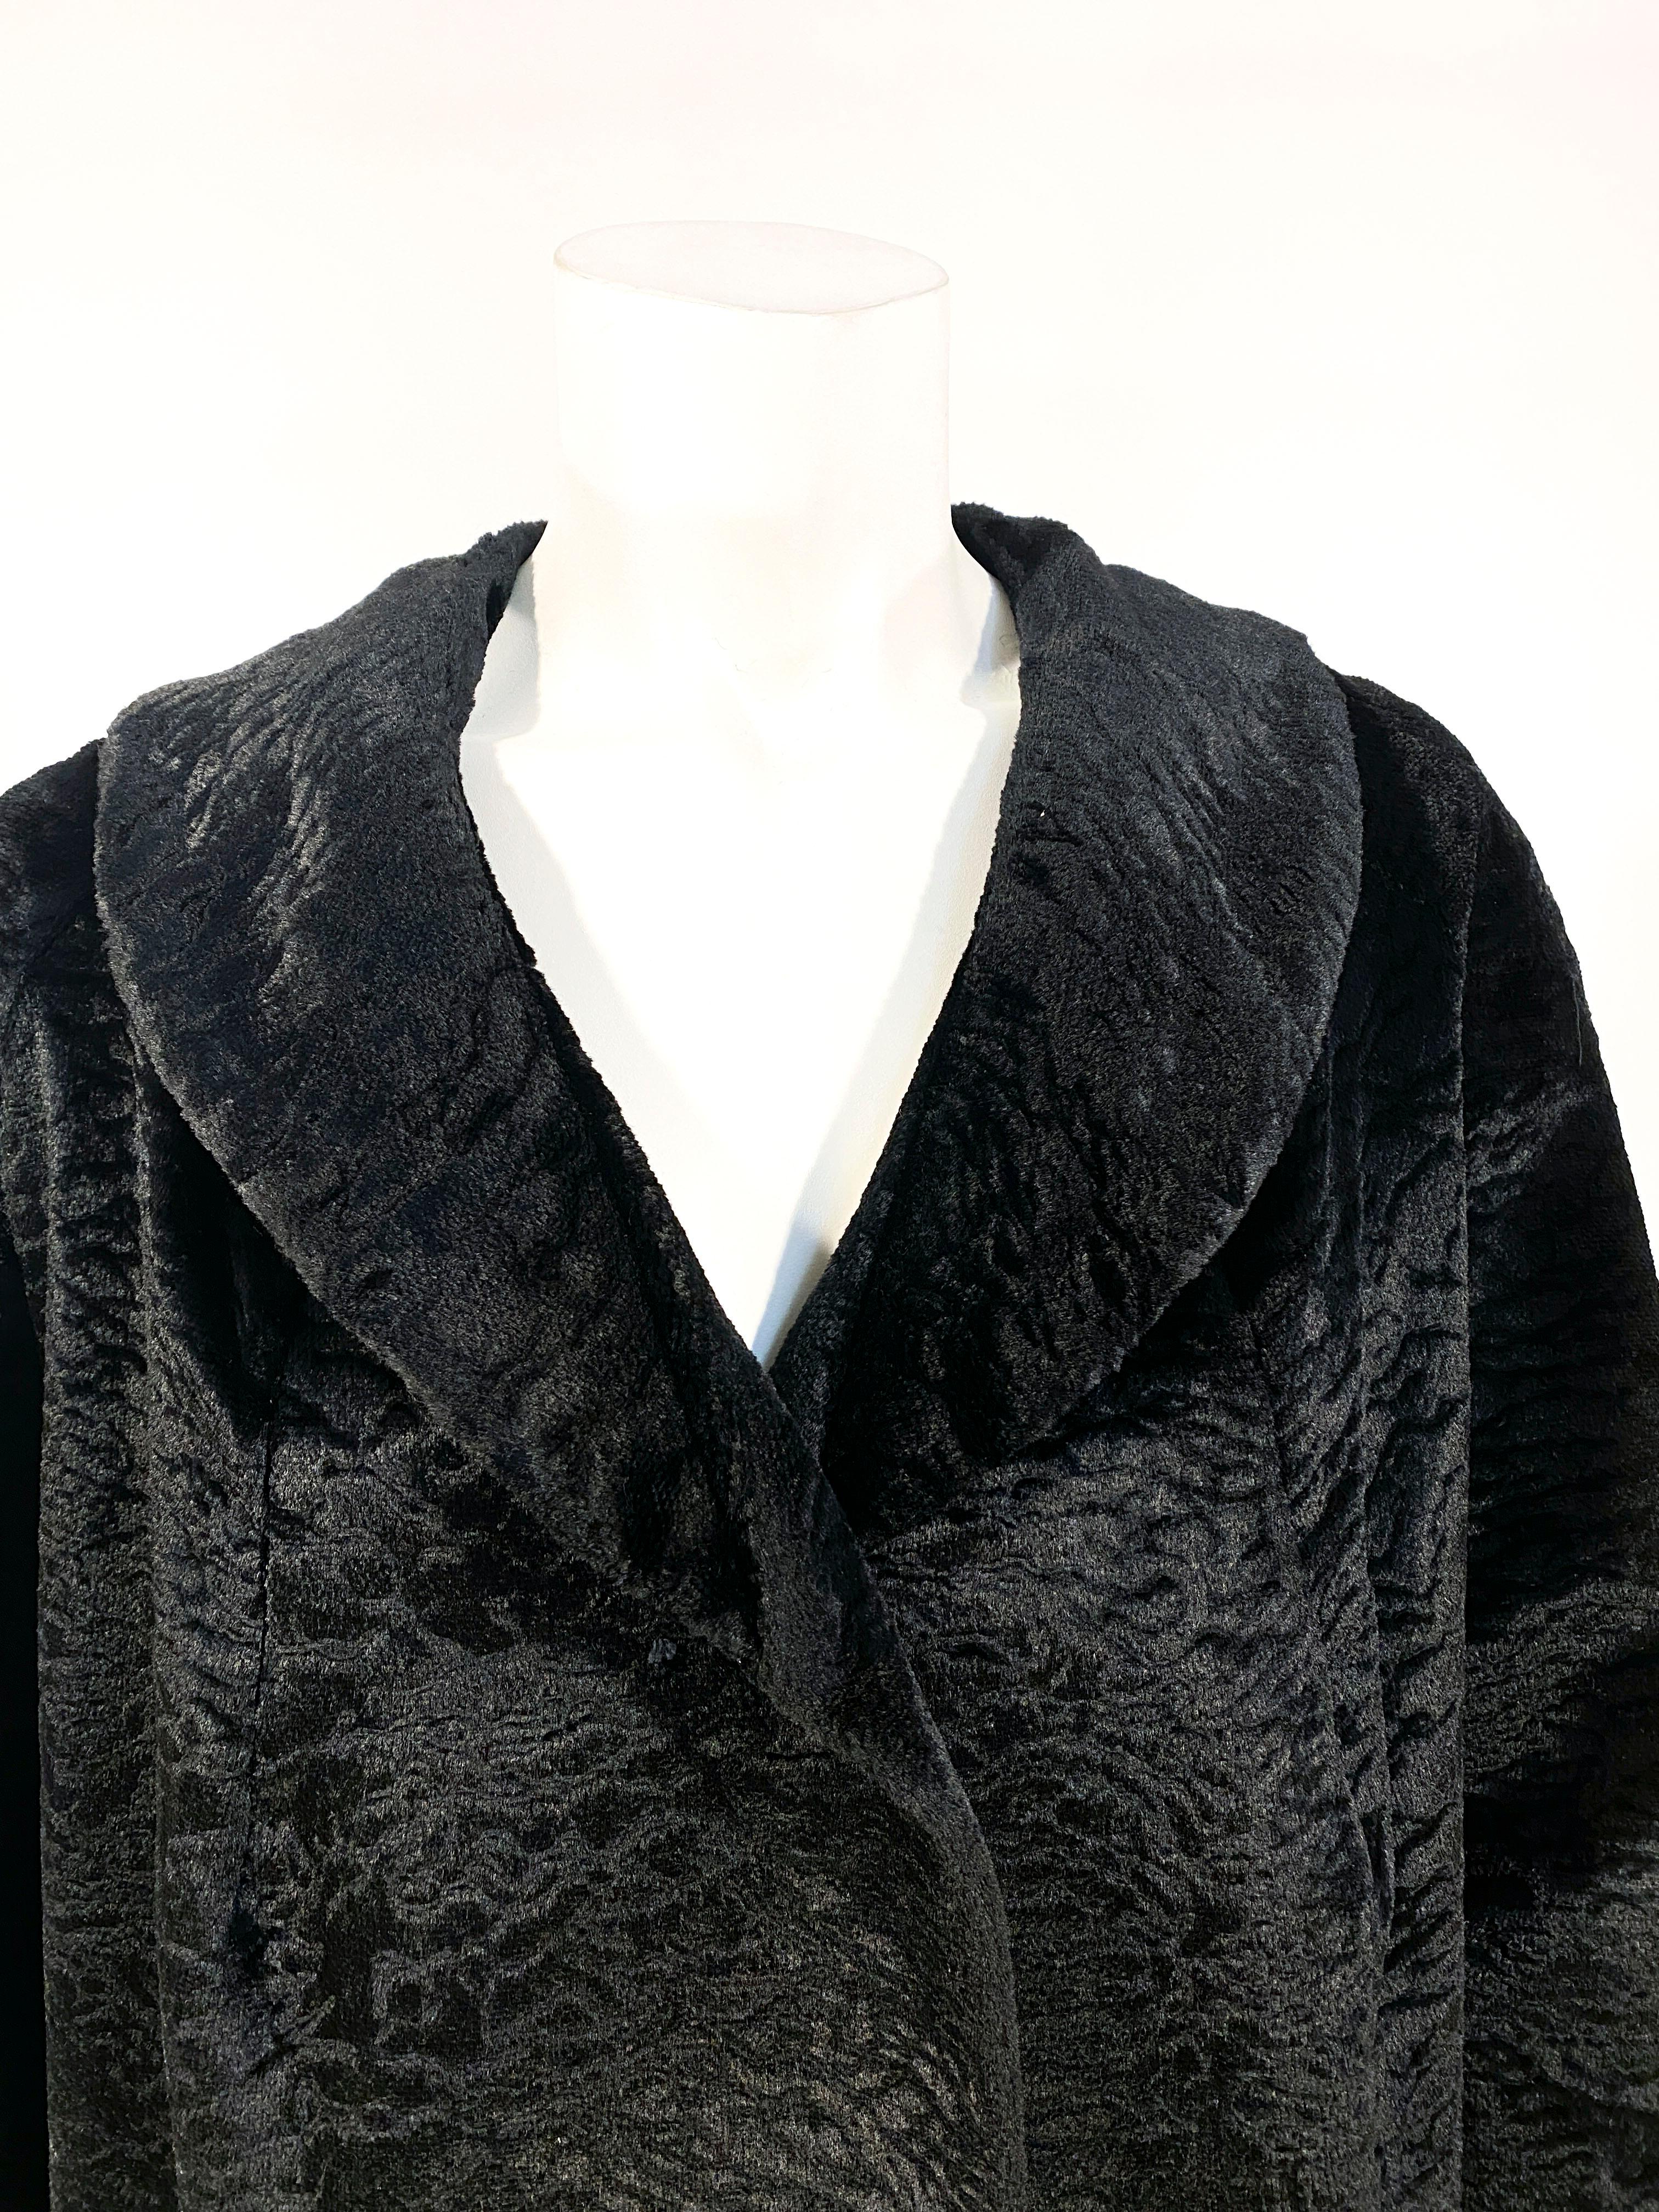 1960s black sculpted velour jacket with faux decorative pockets, slightly full sleeves, modest shawl collar and black jeweled buttons. 